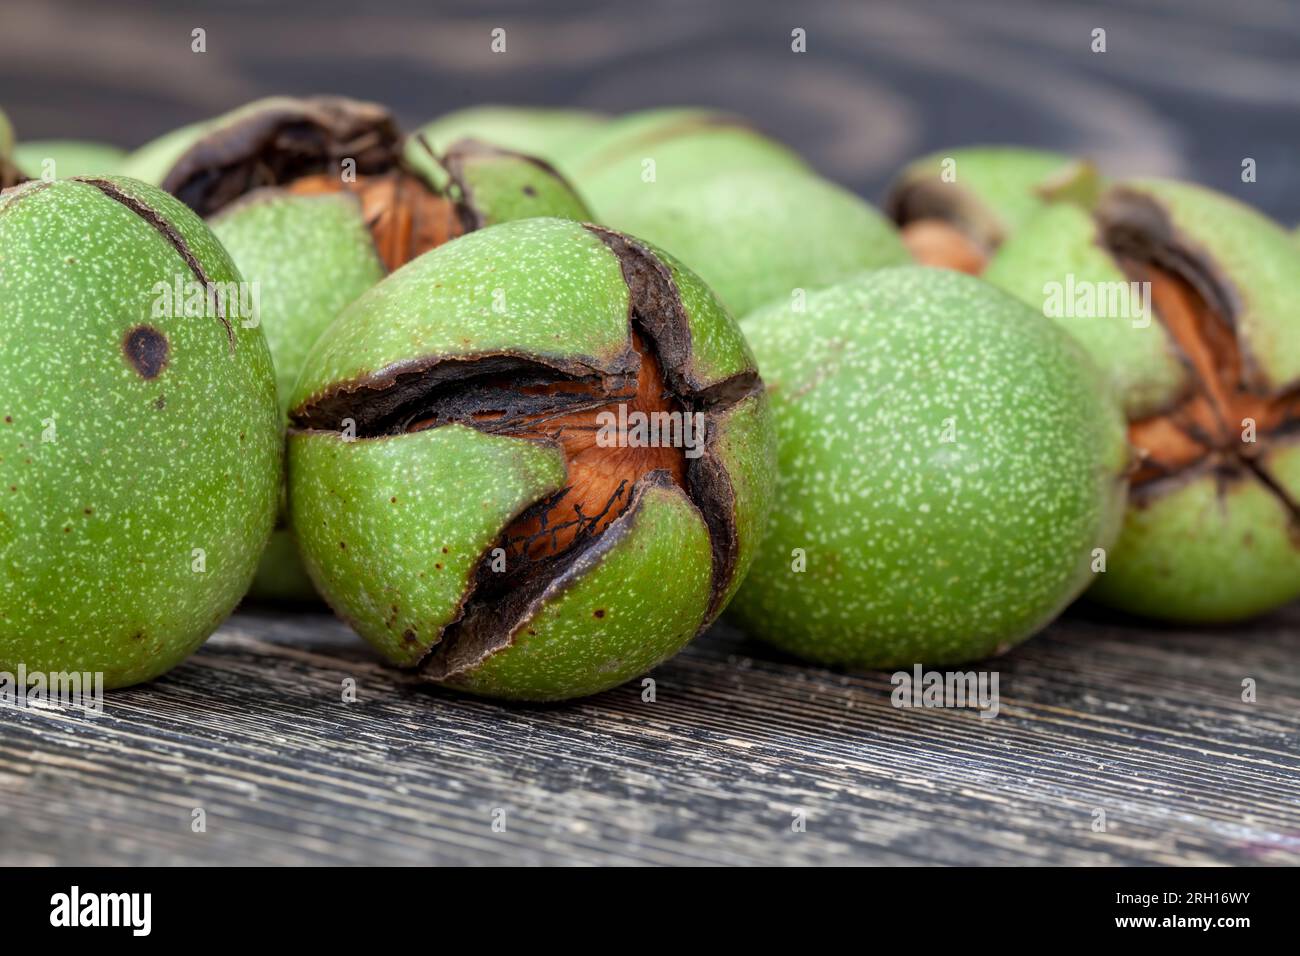 a ripe walnut from which you can get a crop of nuts for nutrition, walnuts harvested and preparing it for drying Stock Photo